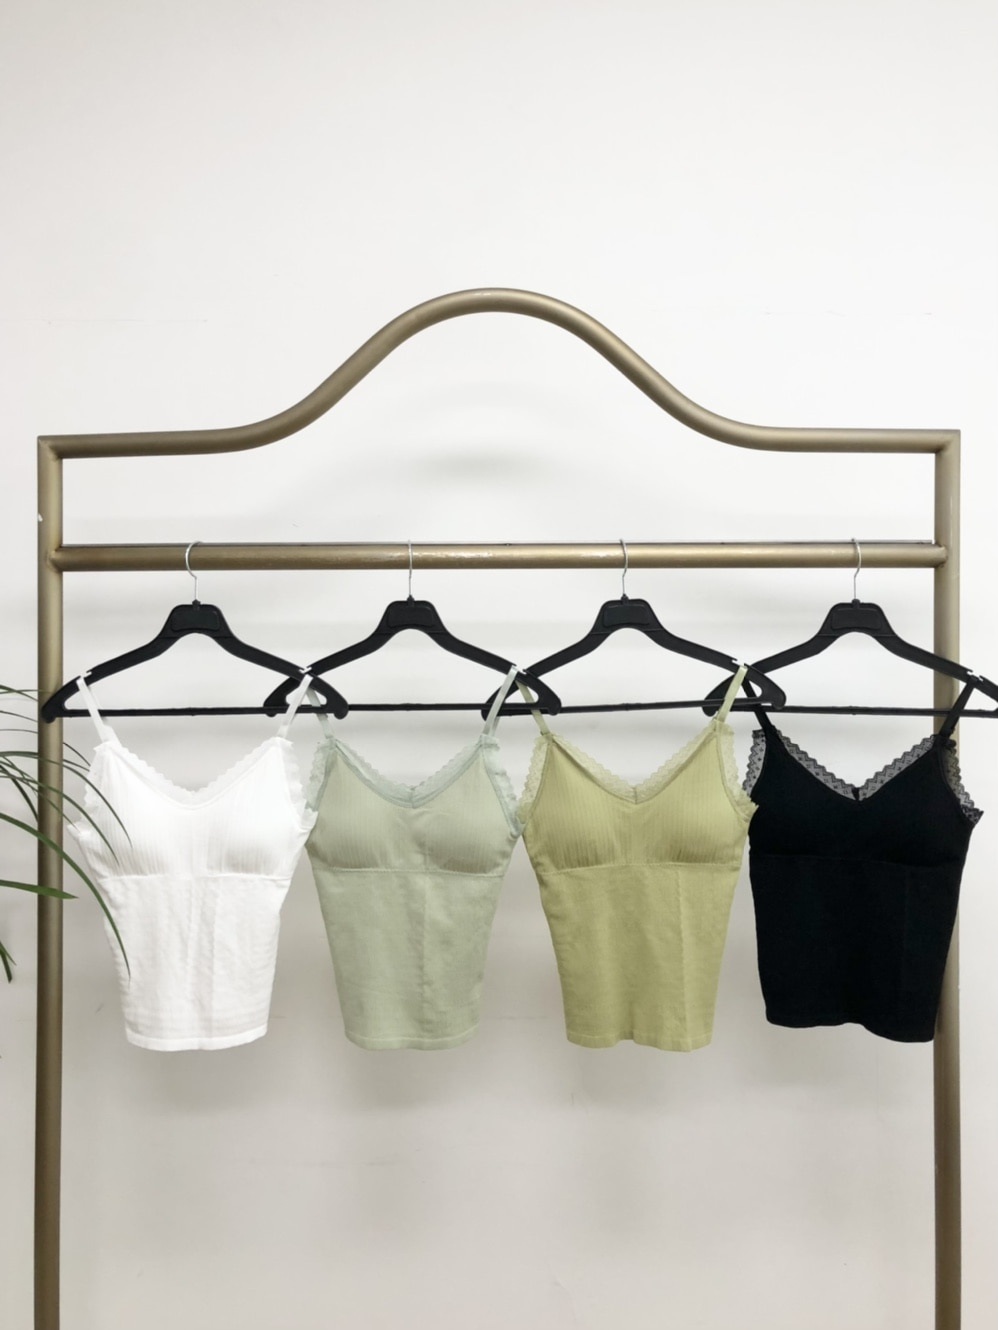 New select) 4 Color Punching Lace Corrugated Span Sleeveless Top (white/mint/green/black)